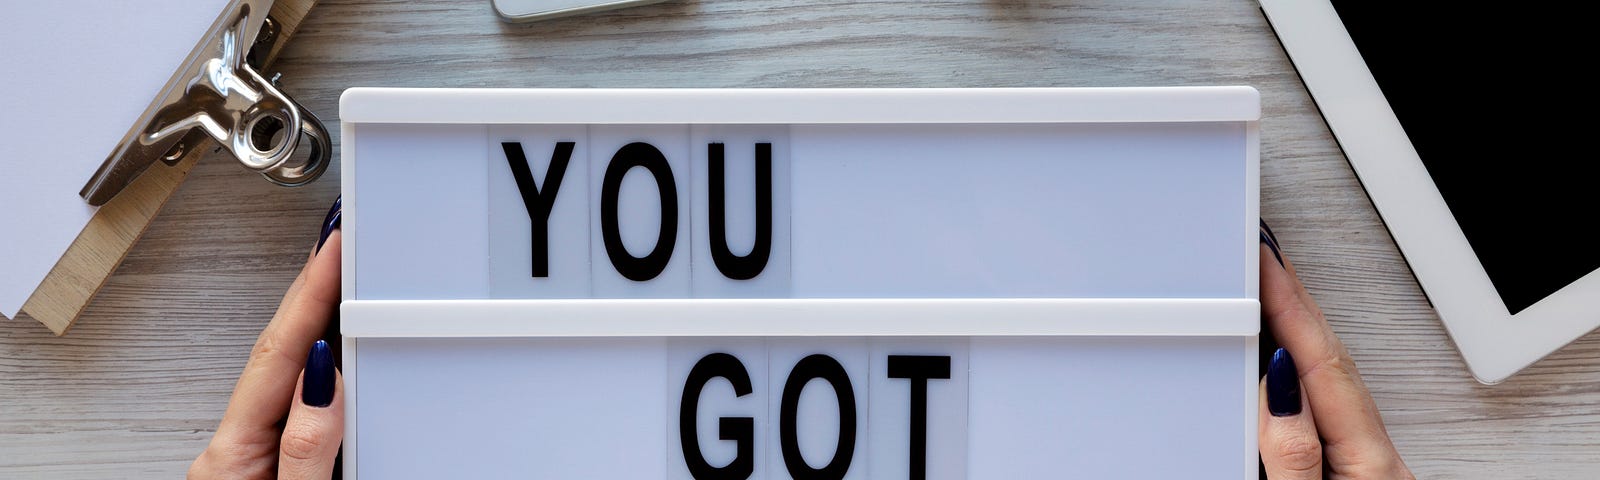 A person holds a sign that says, “You got this.” A notebook, iphone, and ipad are nearby on a gray desk.